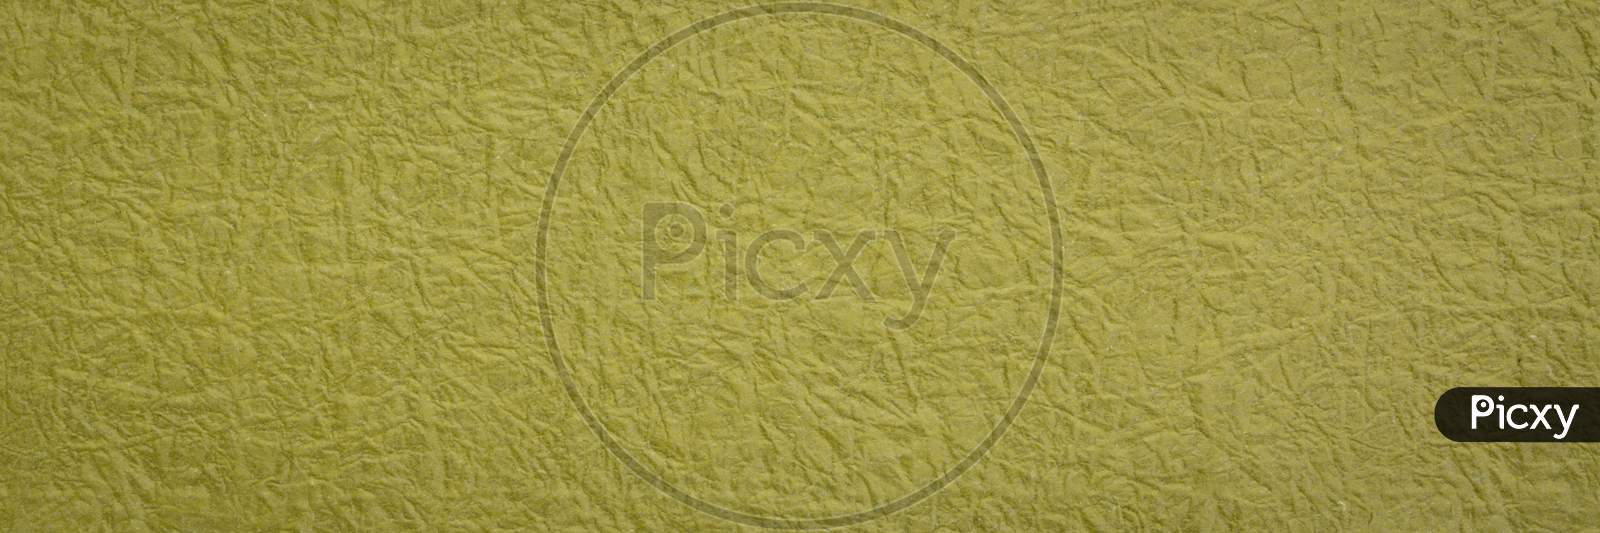 Moss Green Japanese Momi Washi Paper Background Featuring A Rough, Evenly Textured Surface Formed By Crinkling The Paper During The Manufacturing Process, Panoramic Banner